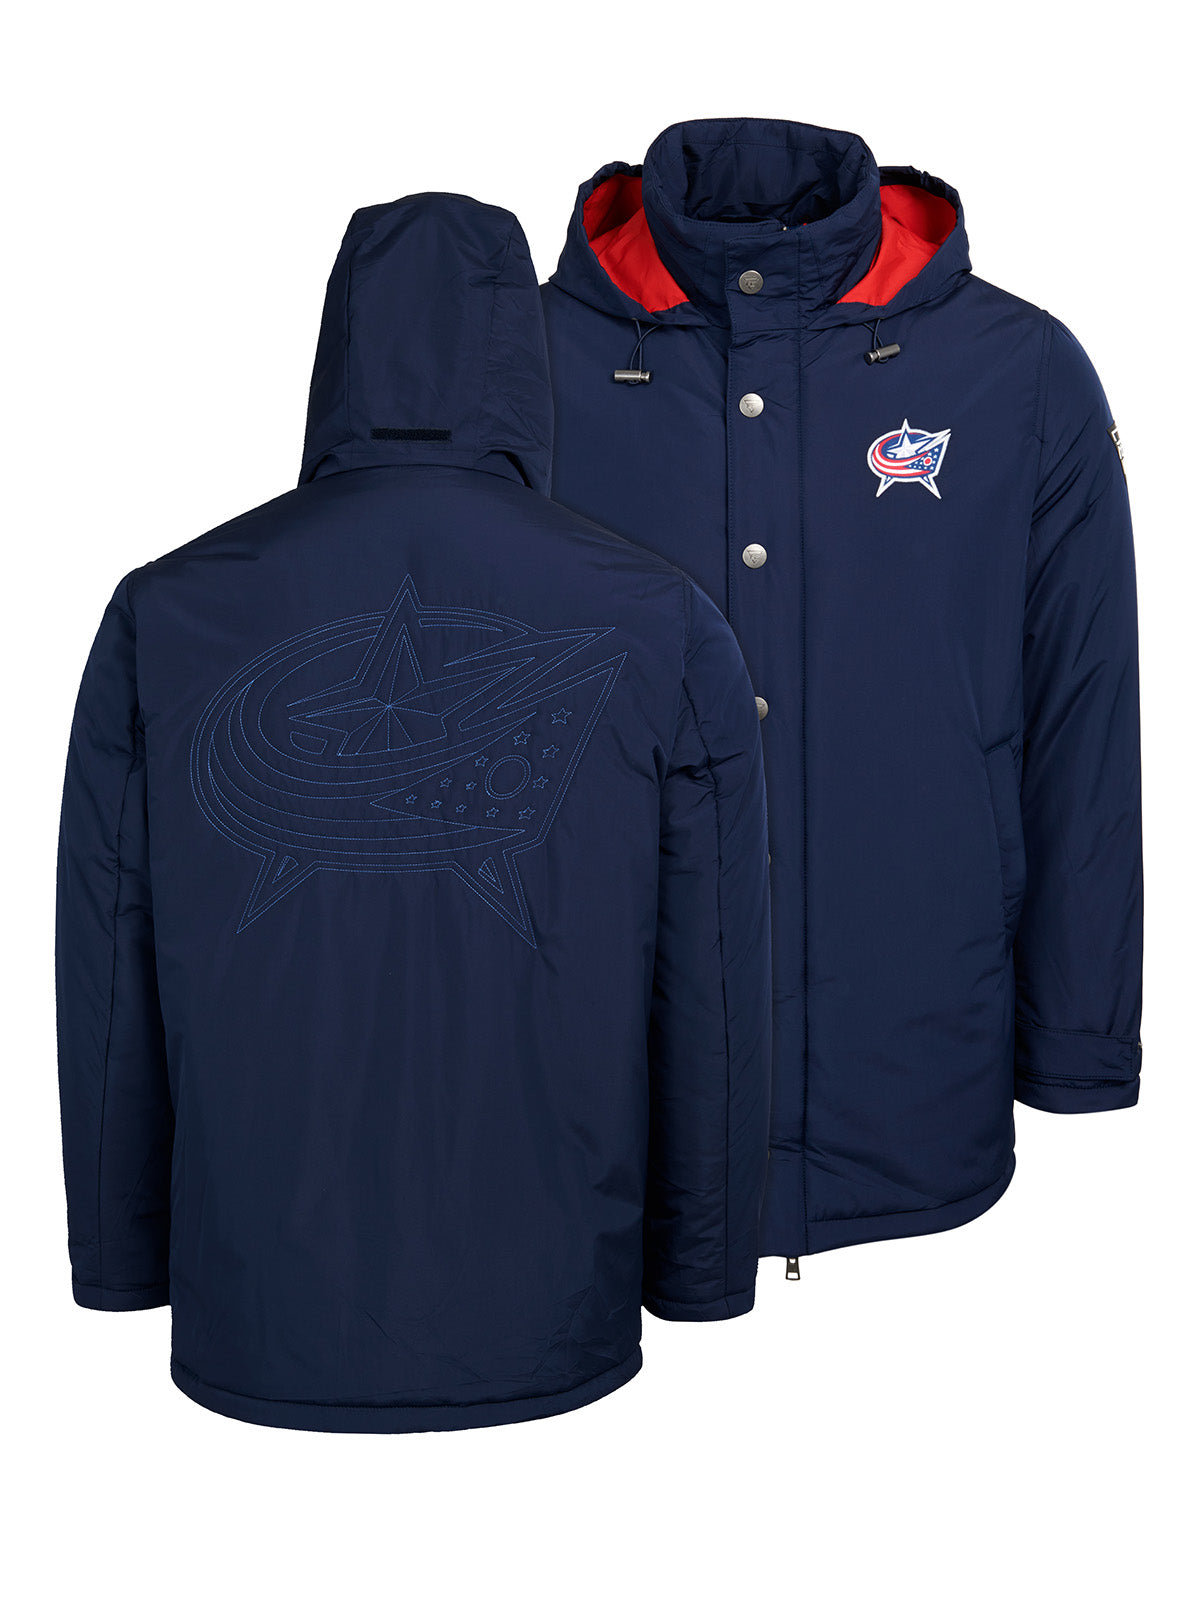 Columbus Blue Jackets Coach's Jacket - The jacket features a quilted stitch of the Columbus Blue Jackets logo centered on the back and has a removal hood in the team colors, elevating this NHL hockey clothing collection